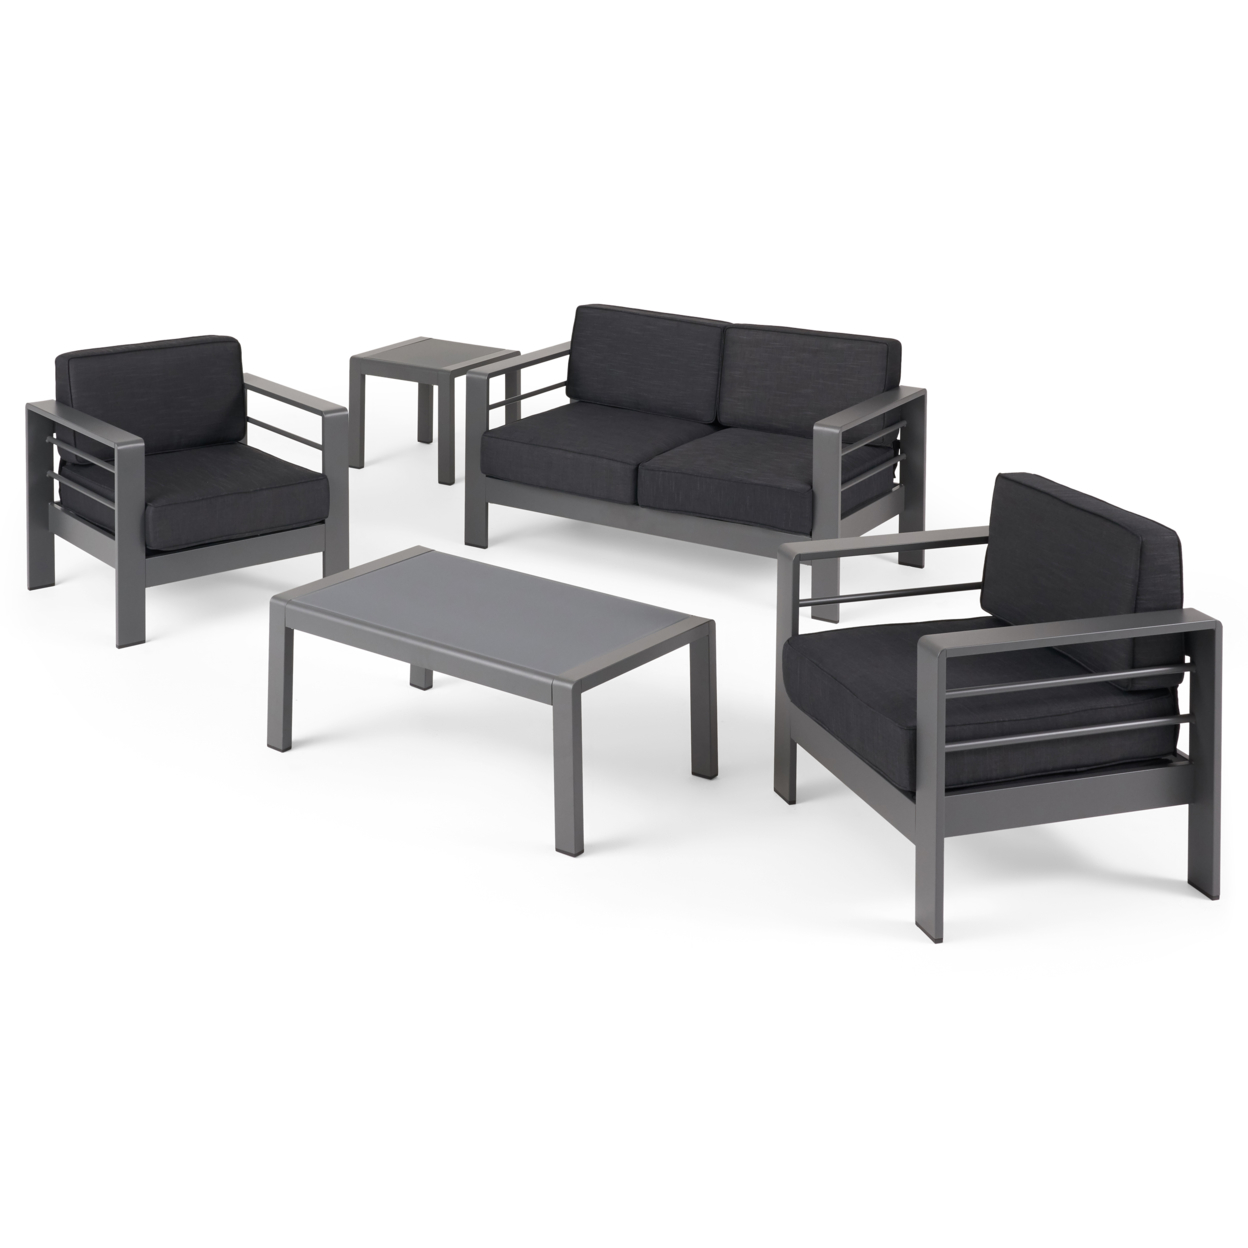 Yolanda Coral Outdoor 4 Seater Aluminum Chat Set With Side Table - Gray, Dark Gray